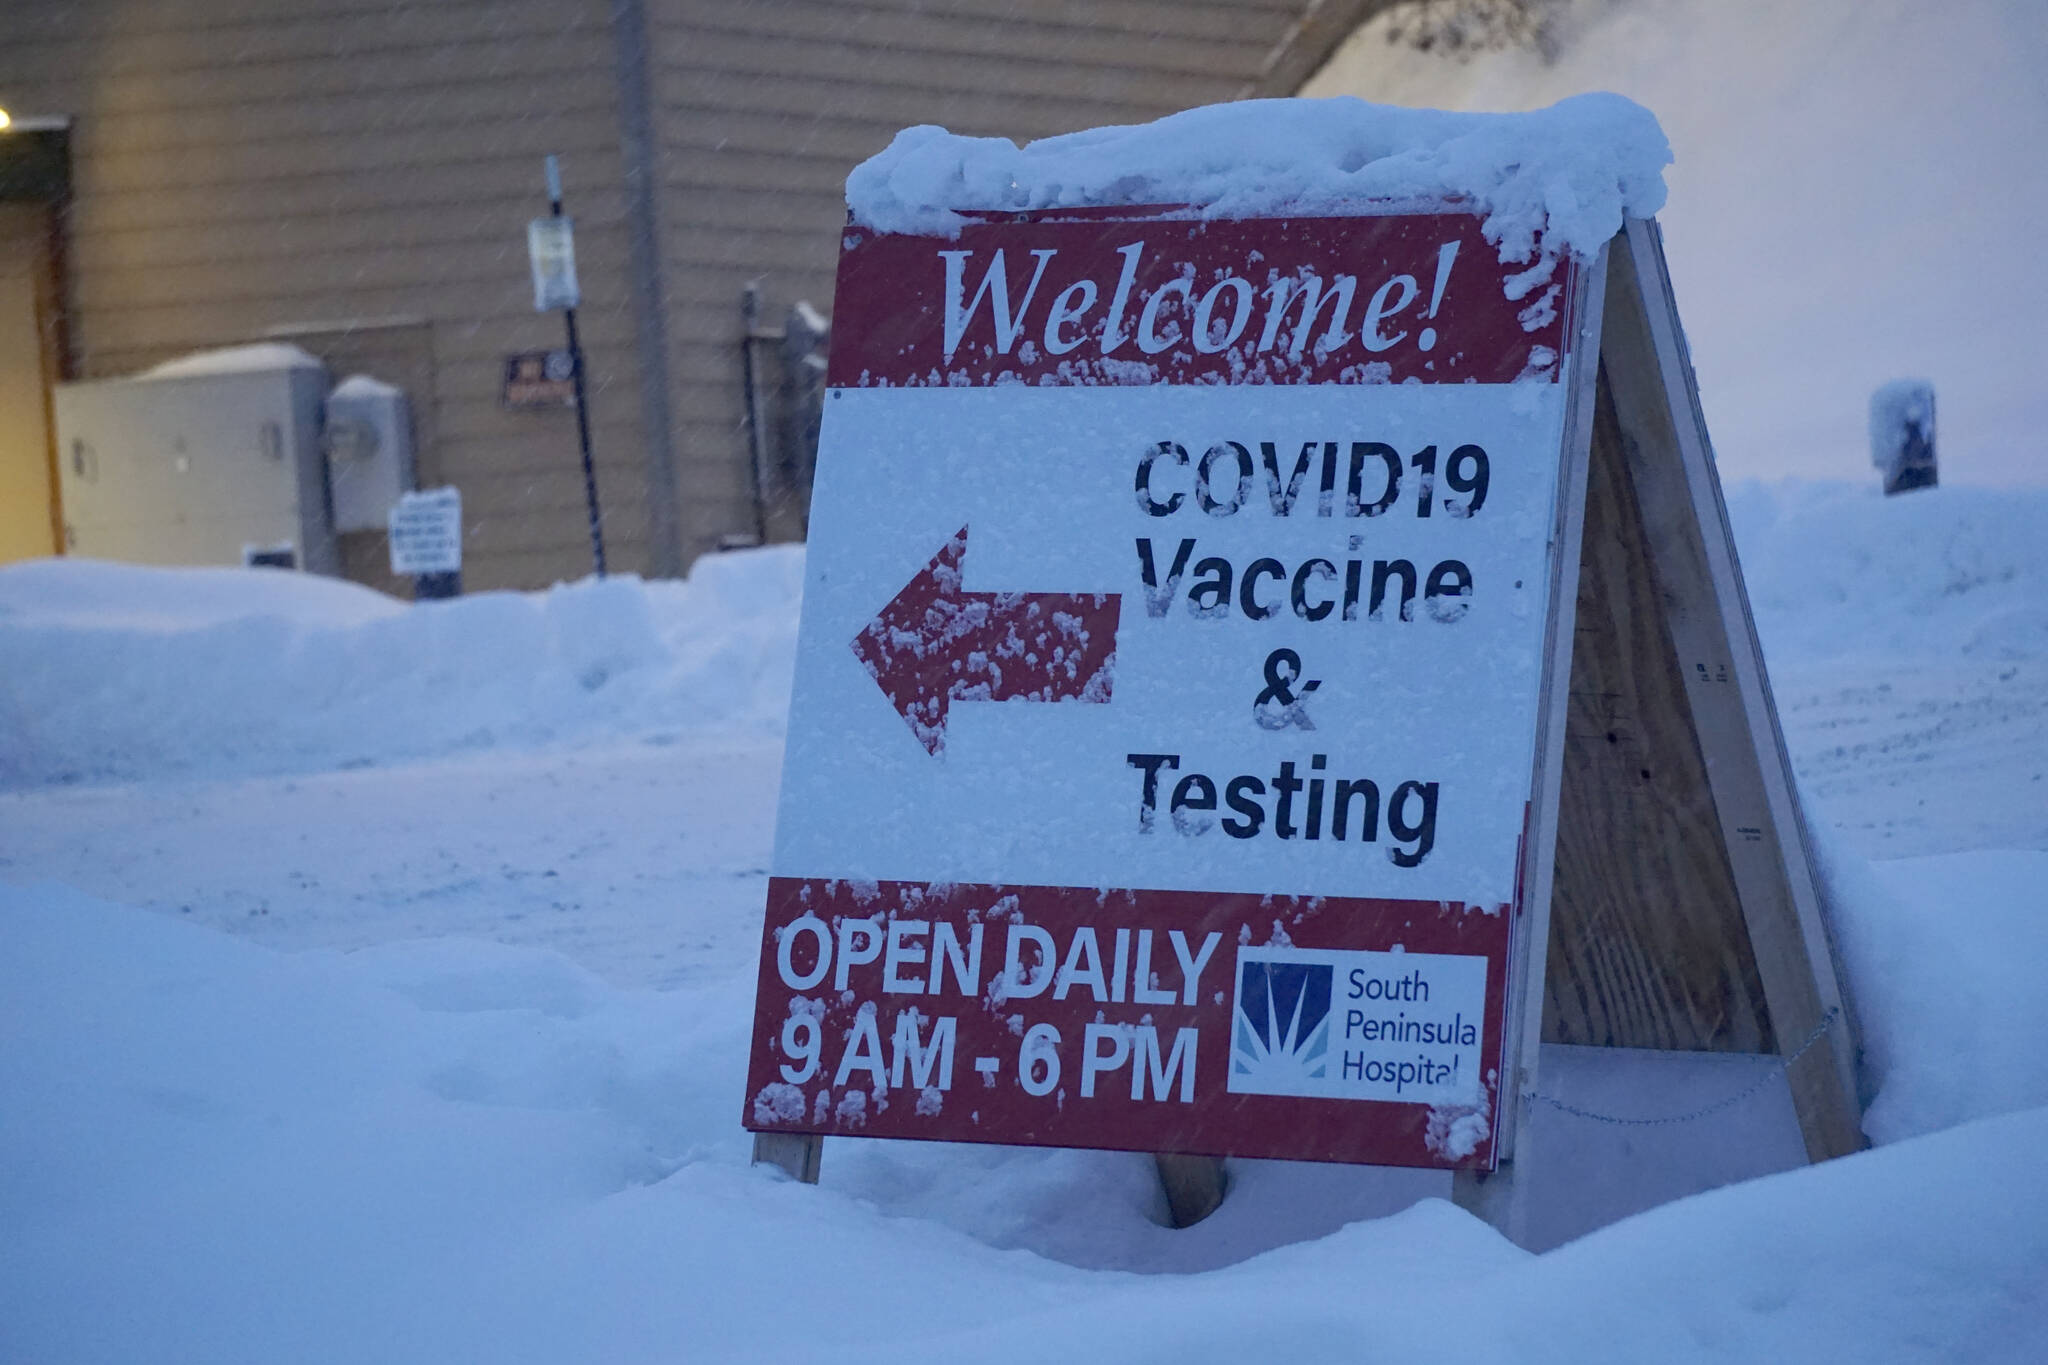 Snow covers the sign on Thursday, Dec. 9, 2021, at the South Peninsula Hospital Bartlett Street COVID-19 testing and vaccination clinic in Homer, Alaska. (Photo by Michael Armstrong/Homer News)